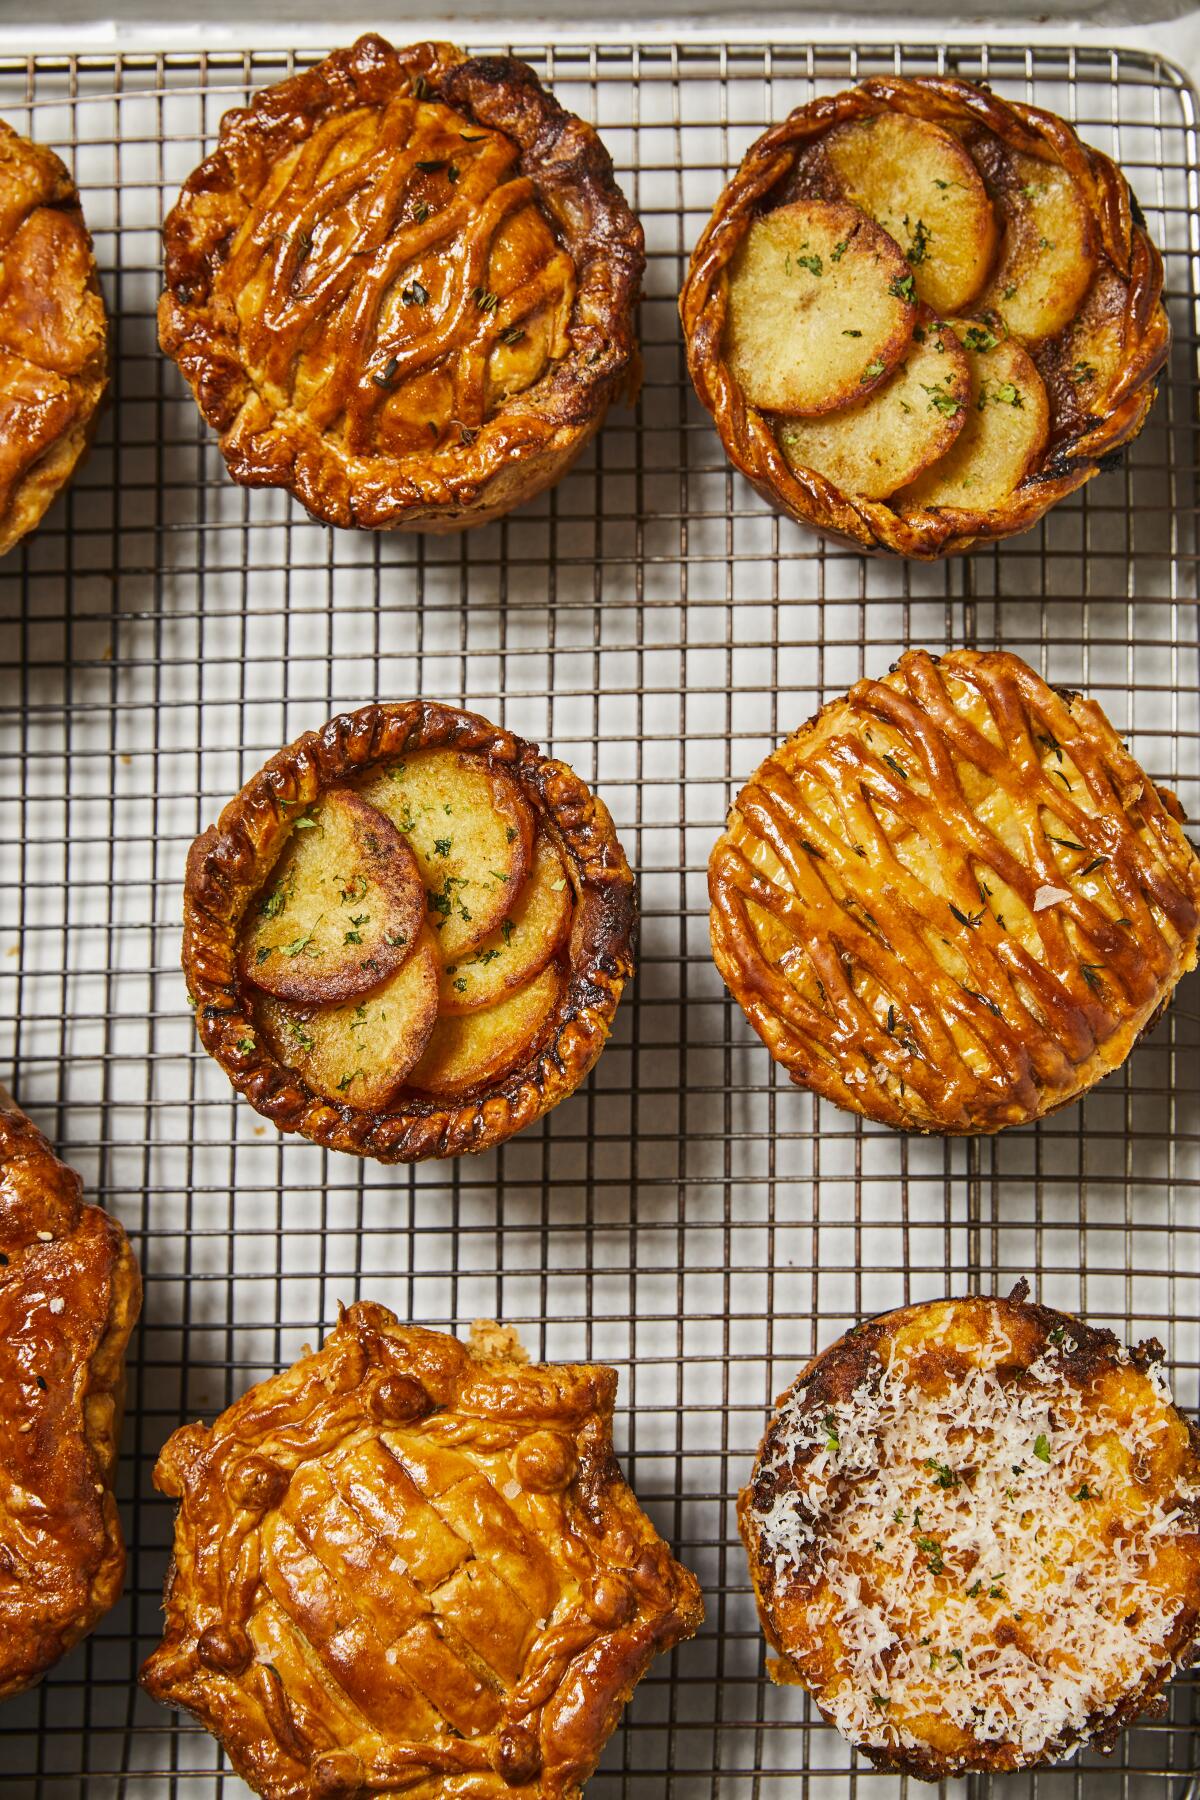 Savory pies from Curtis Stone